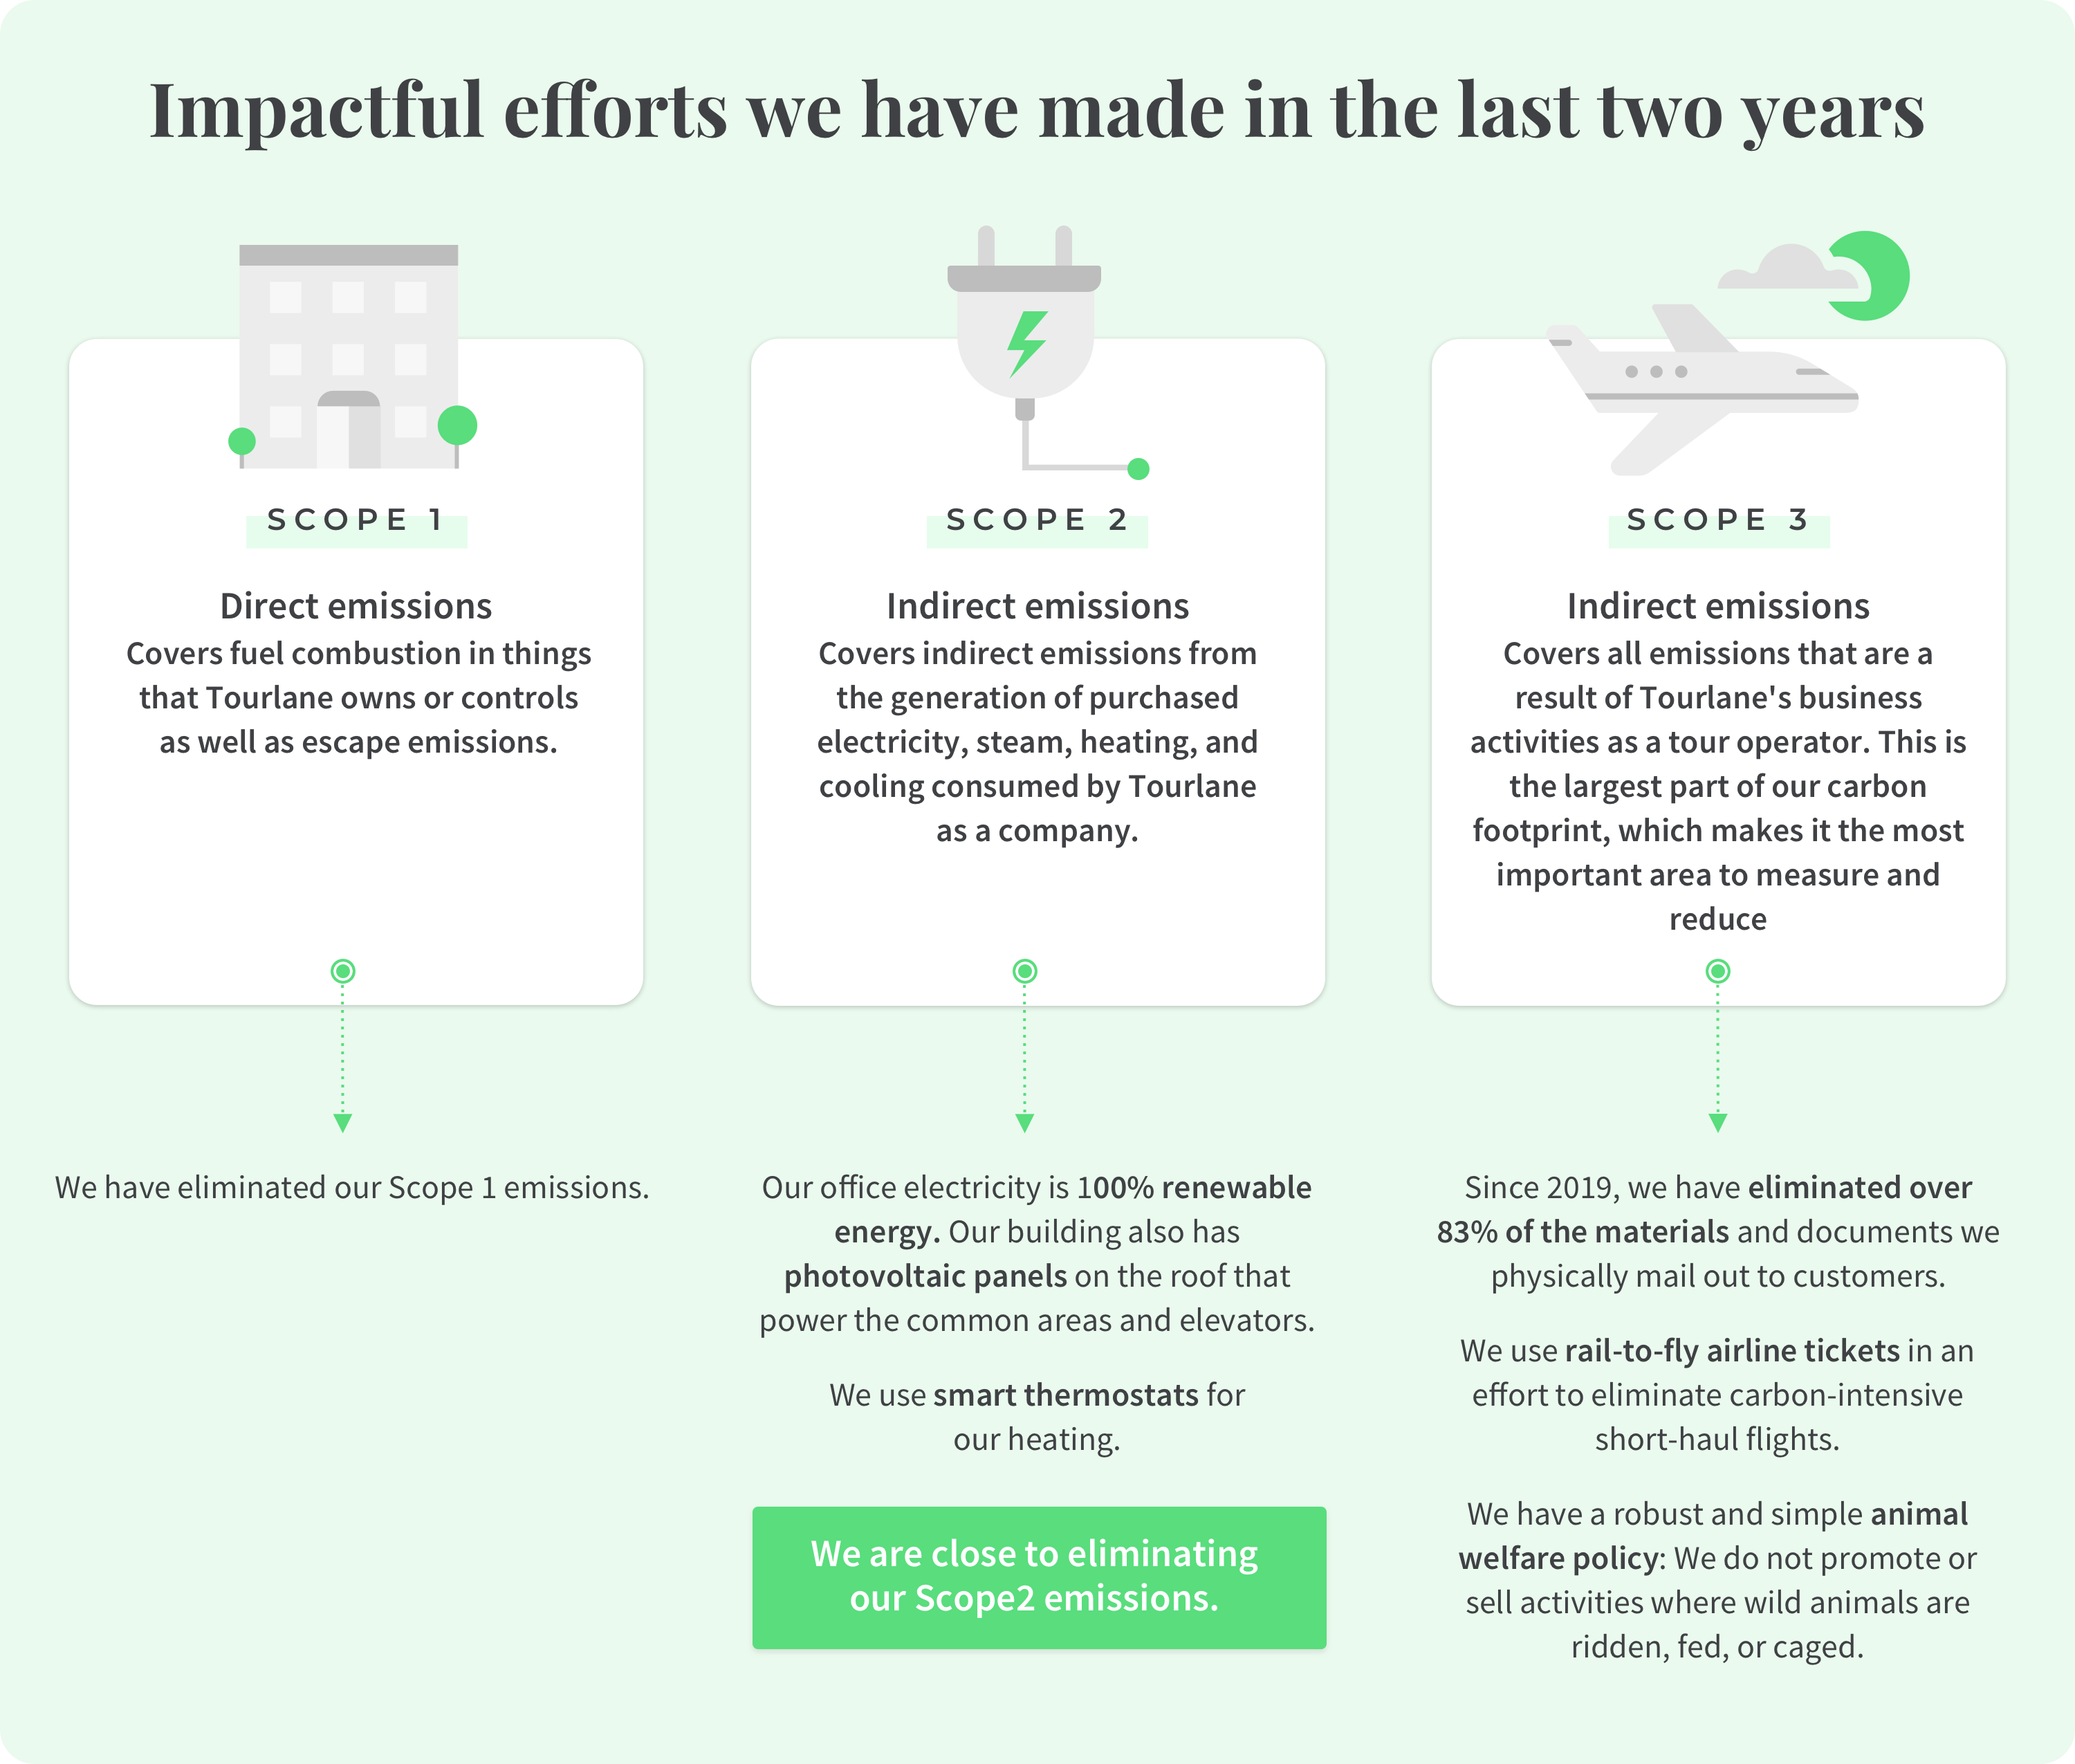 GHG Protocol Impactful efforts of the last two years